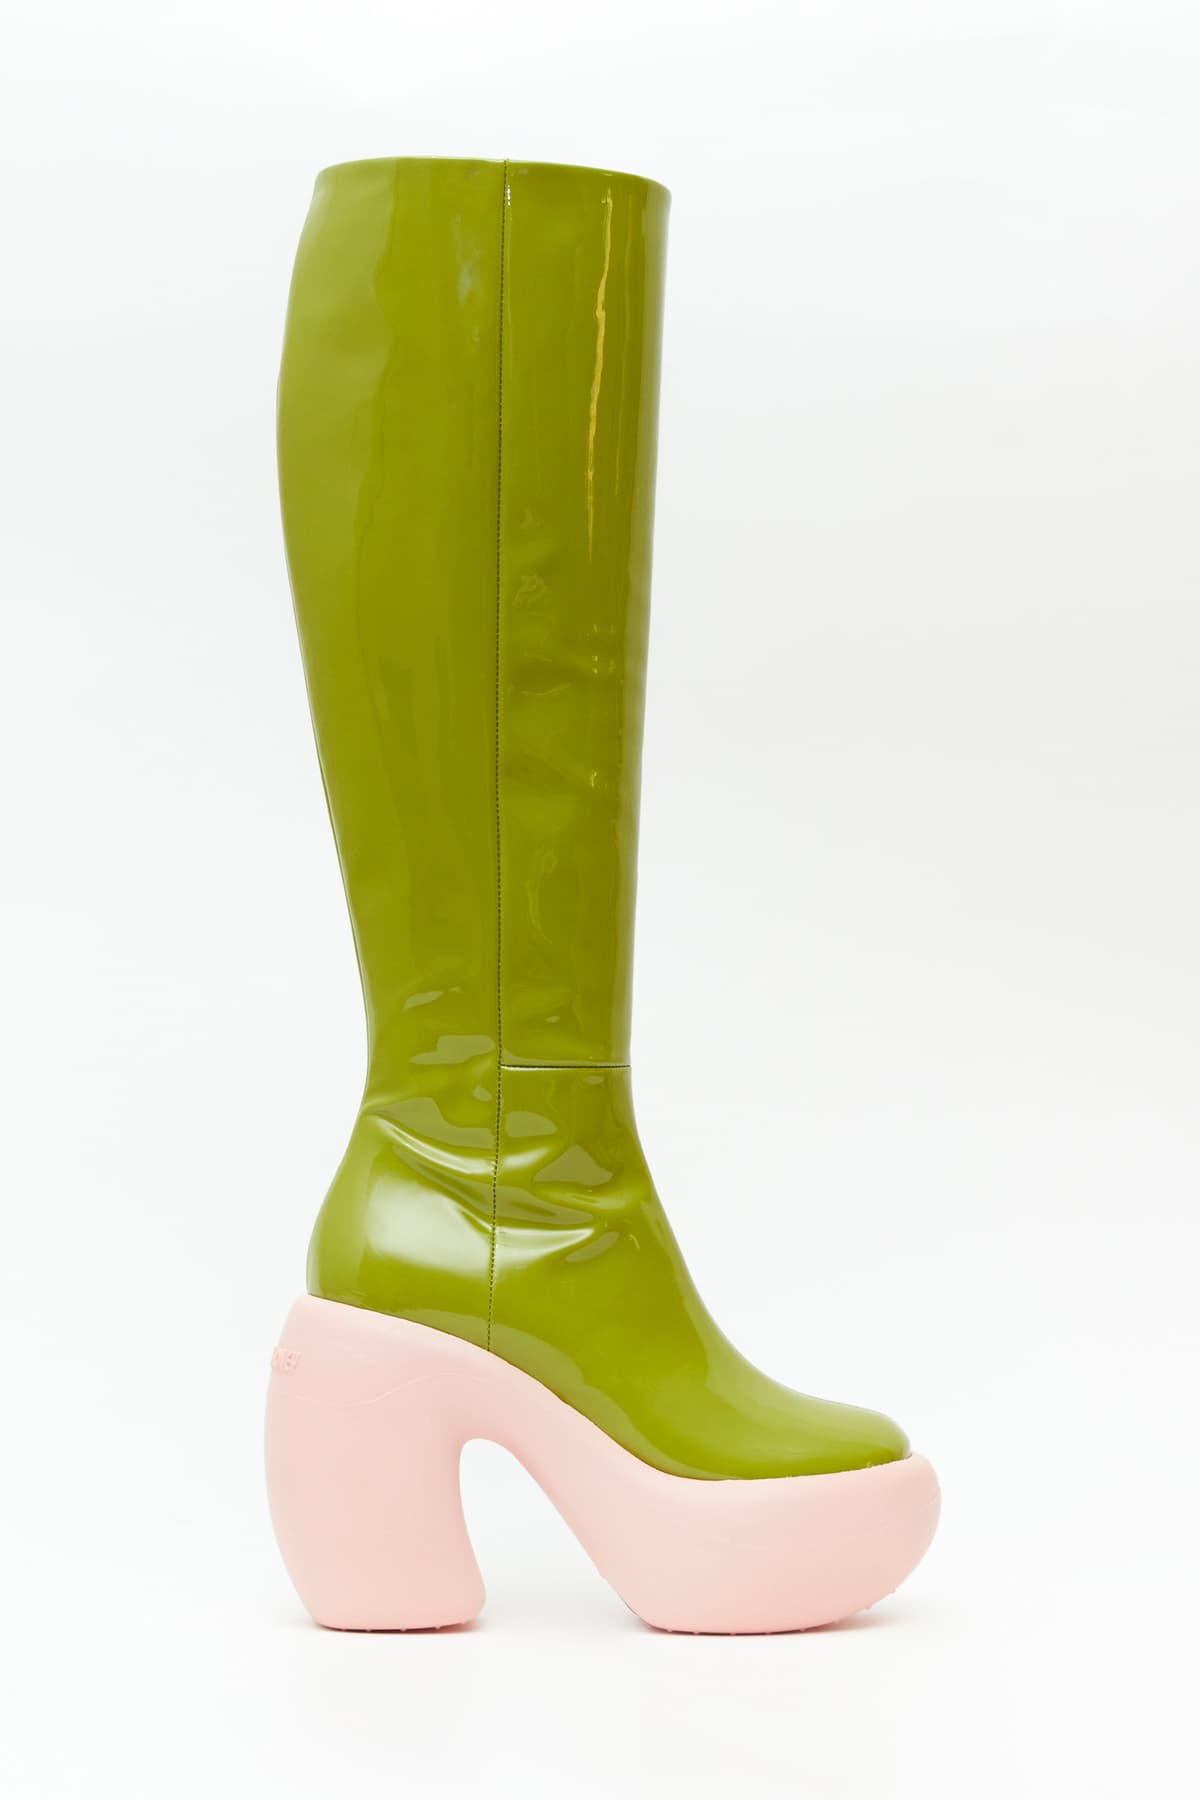 Sideview of Honey Bubble Boot in green with pink rubber sole from the Haus of Honey fall-winter 2023-24